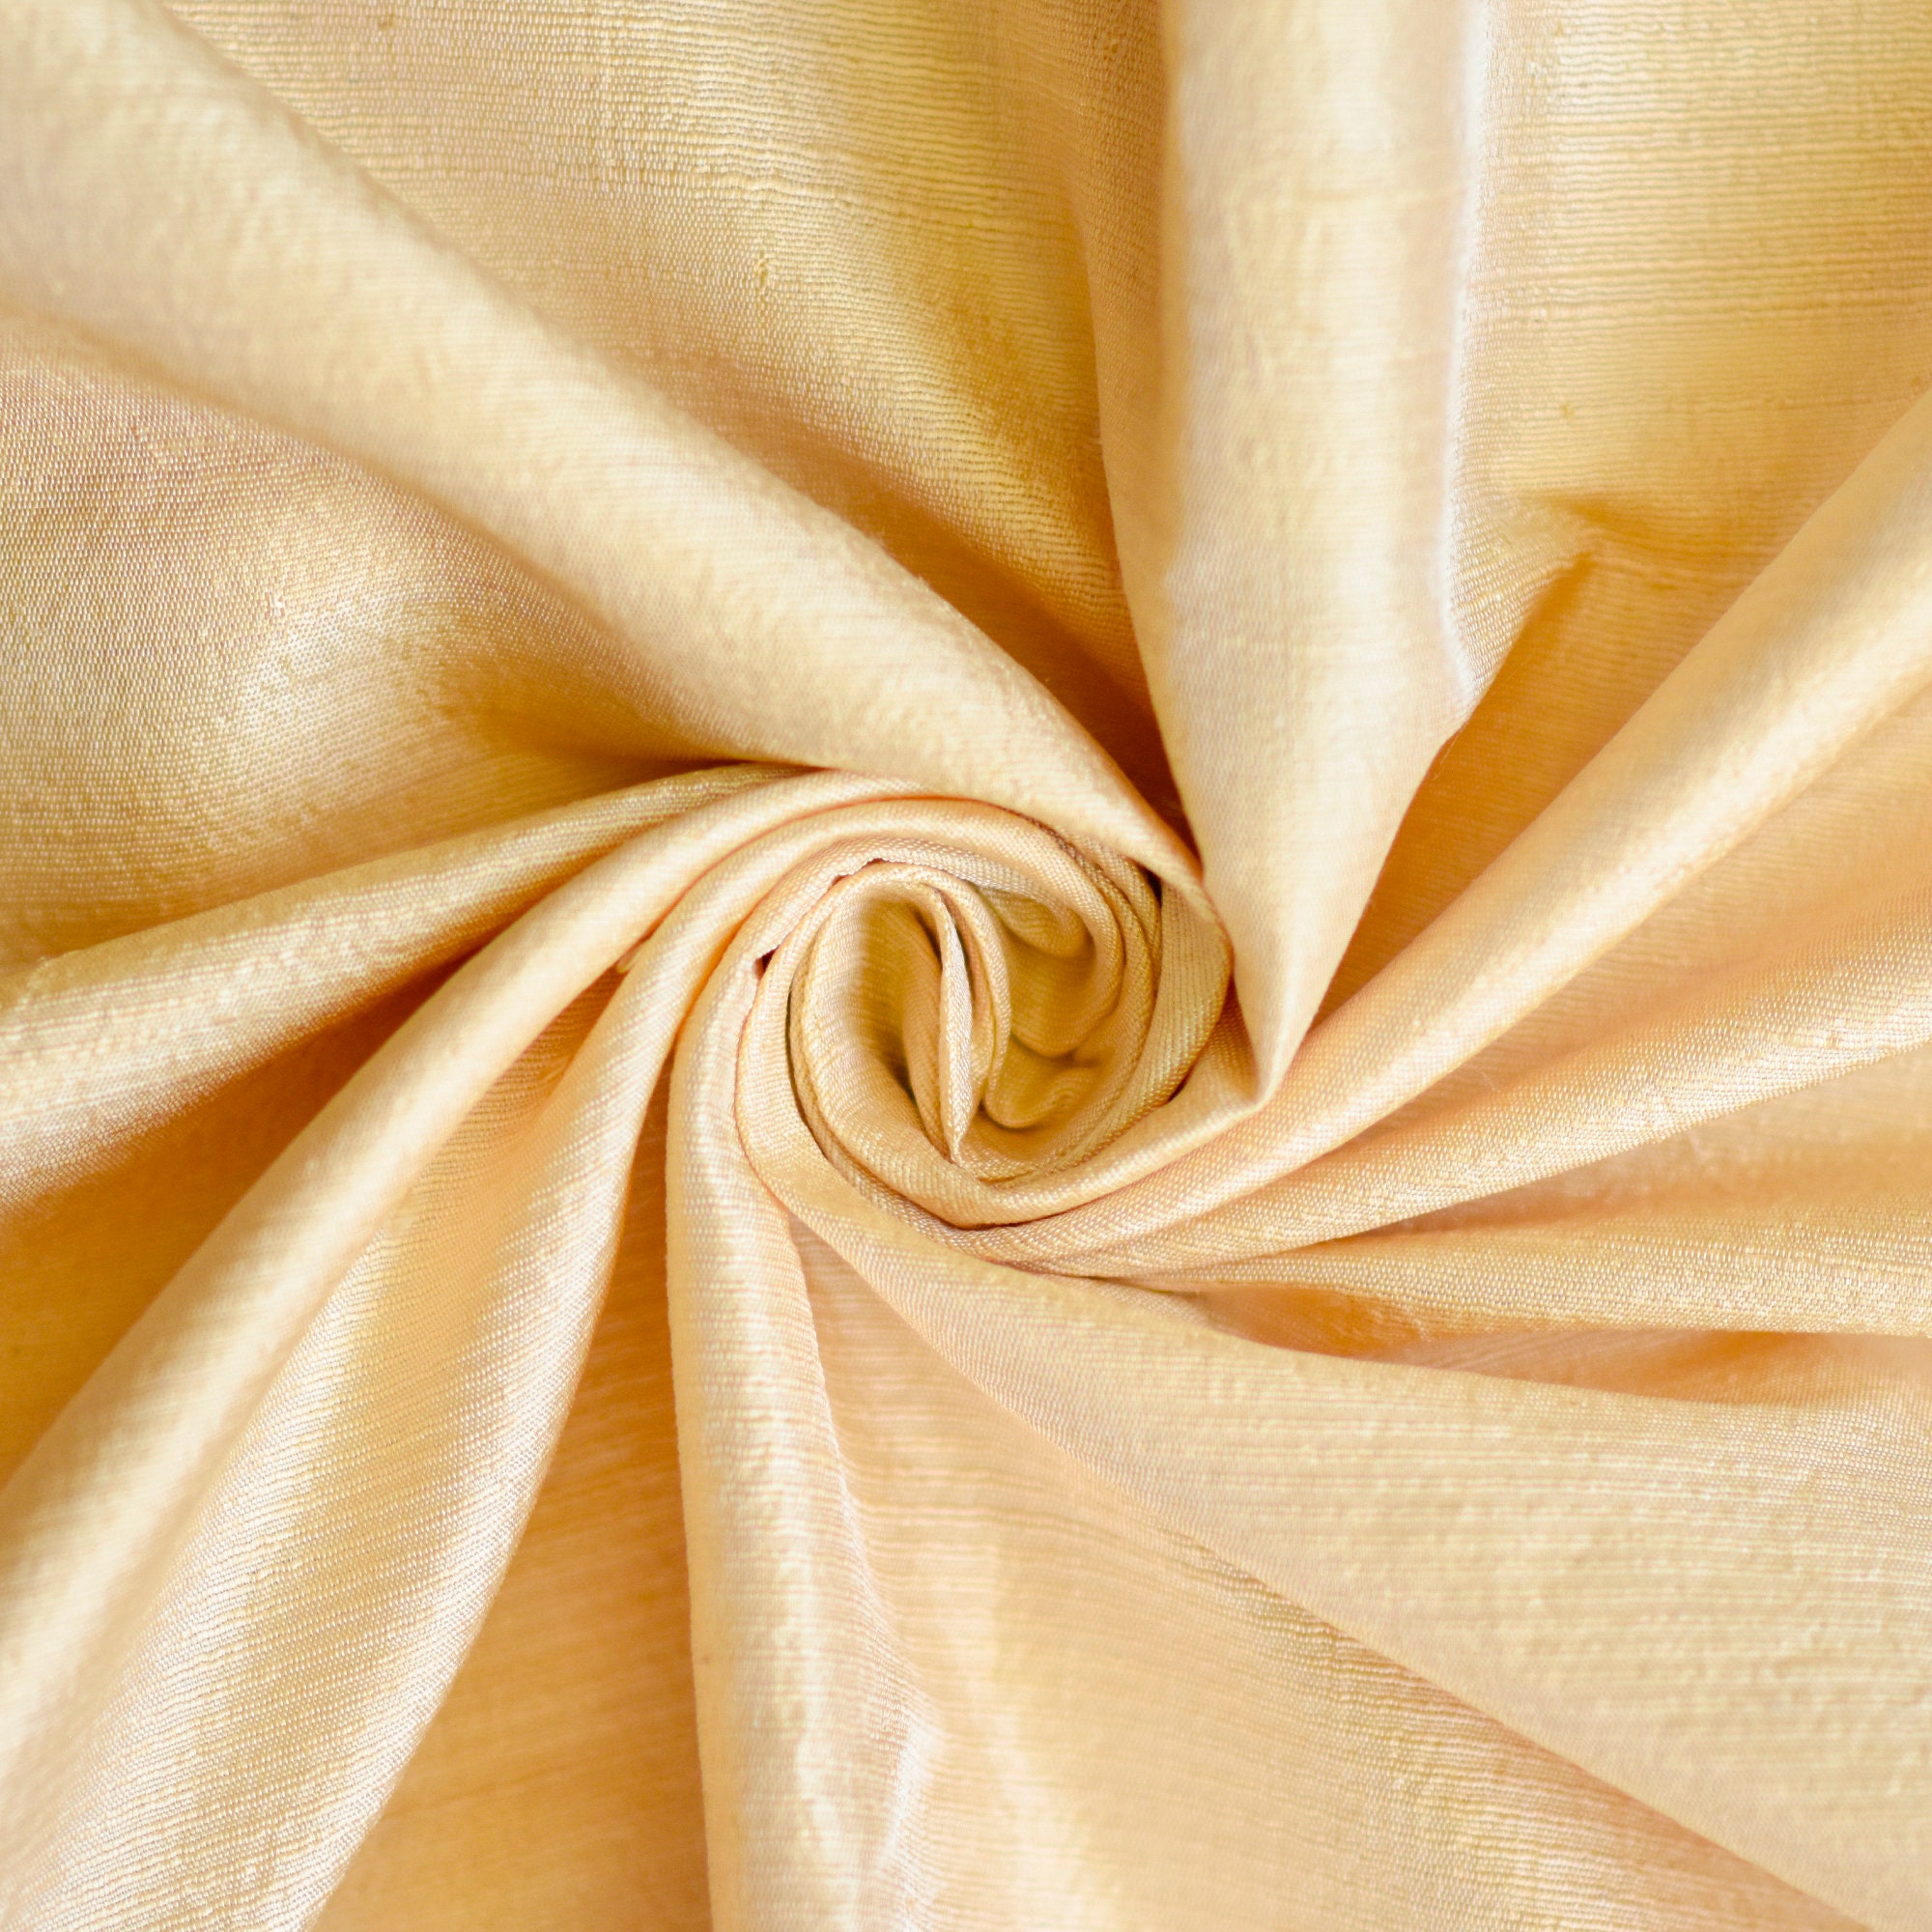 Light Gold Silk Fabric by the Yard, 41 Inch Light Gold Dupioni Silk Fabric,  Wholesale Slub Silk Fabric for Drapes, Curtains, Wedding Dress 